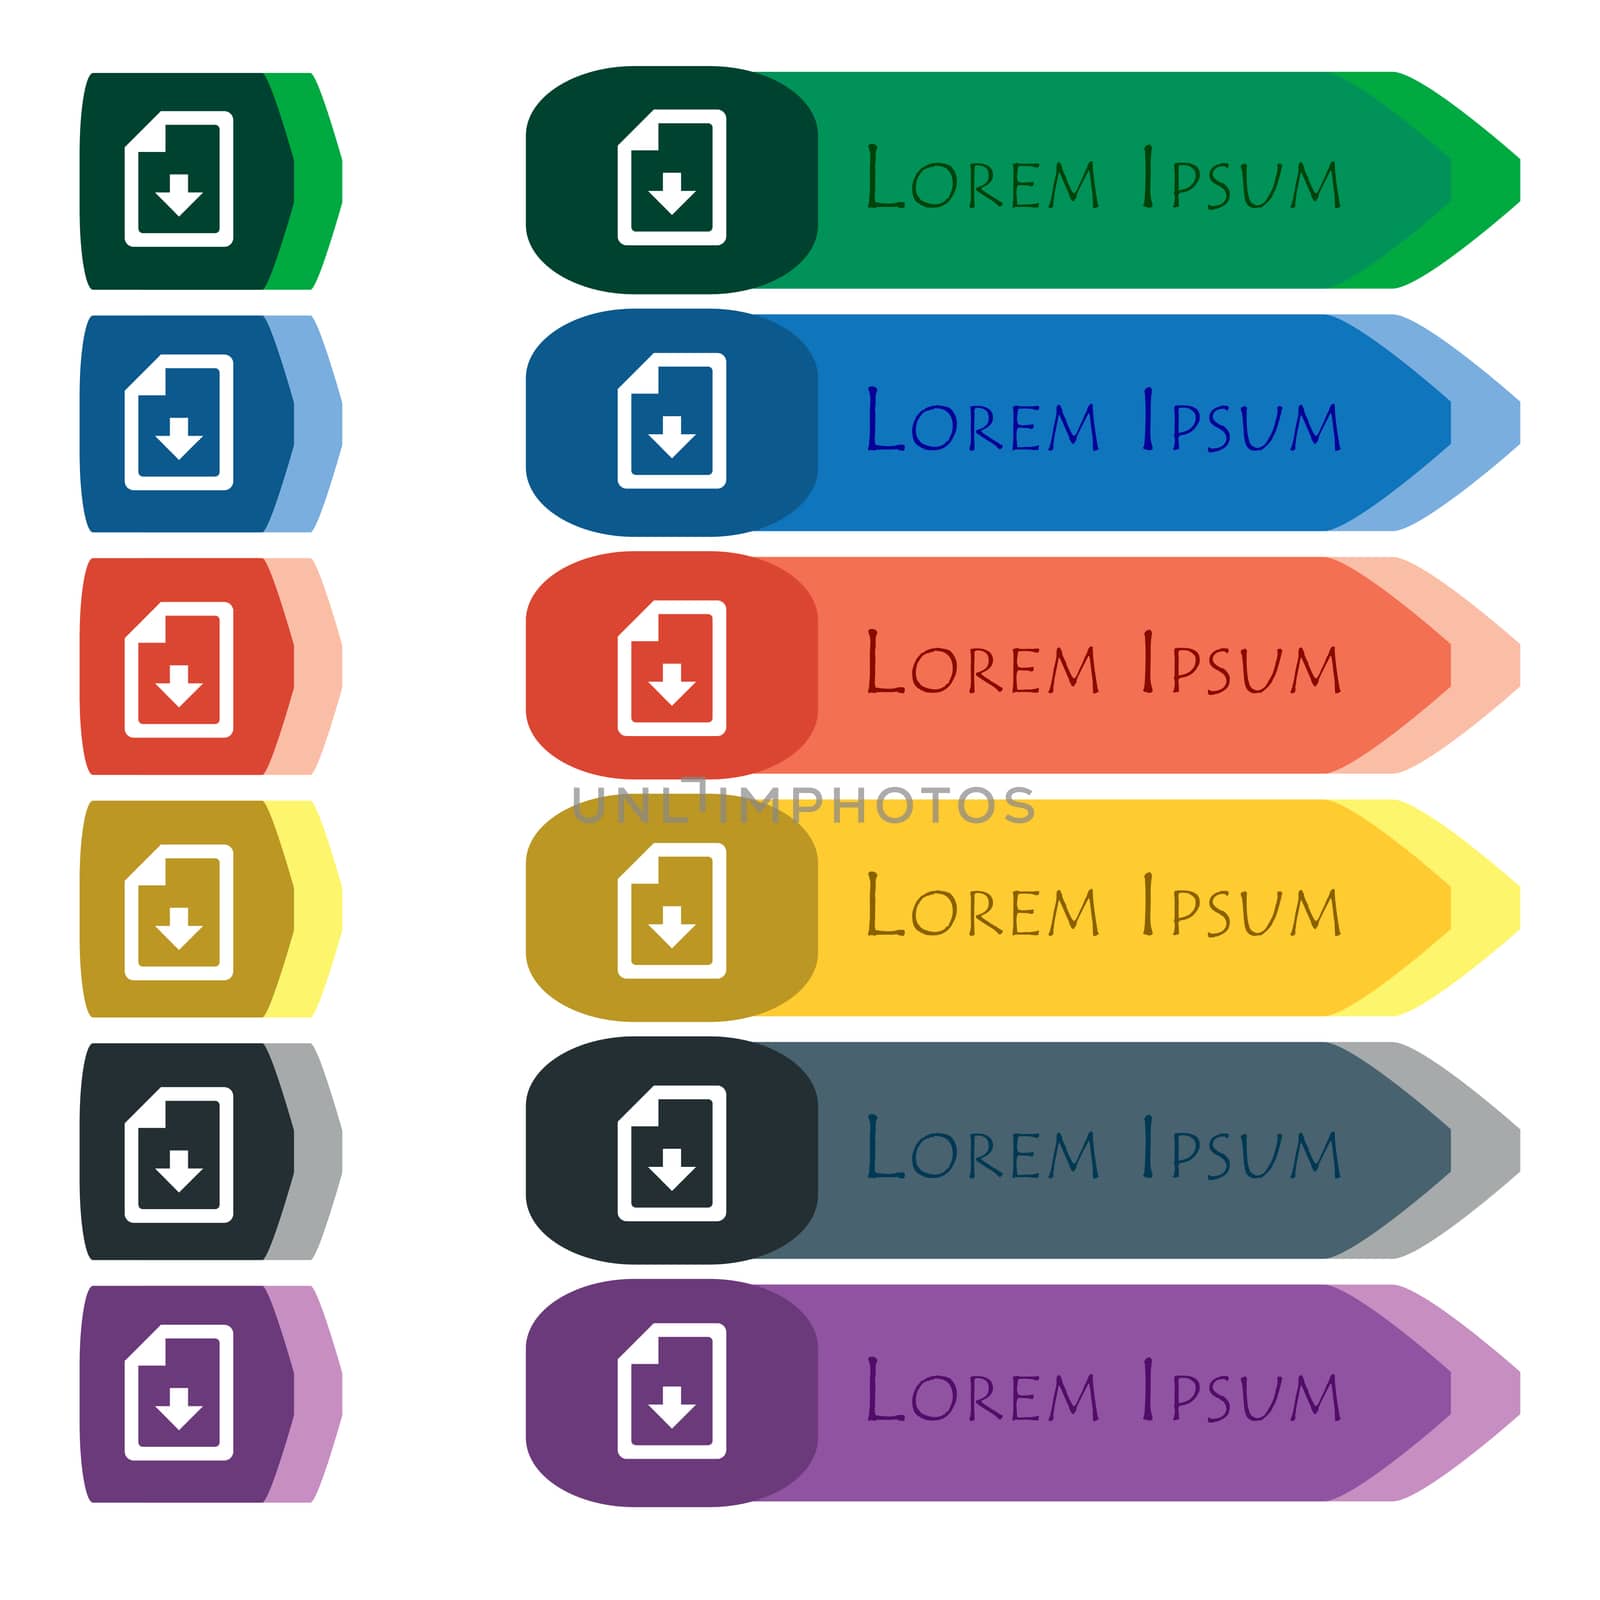 import, download file icon sign. Set of colorful, bright long buttons with additional small modules. Flat design. 